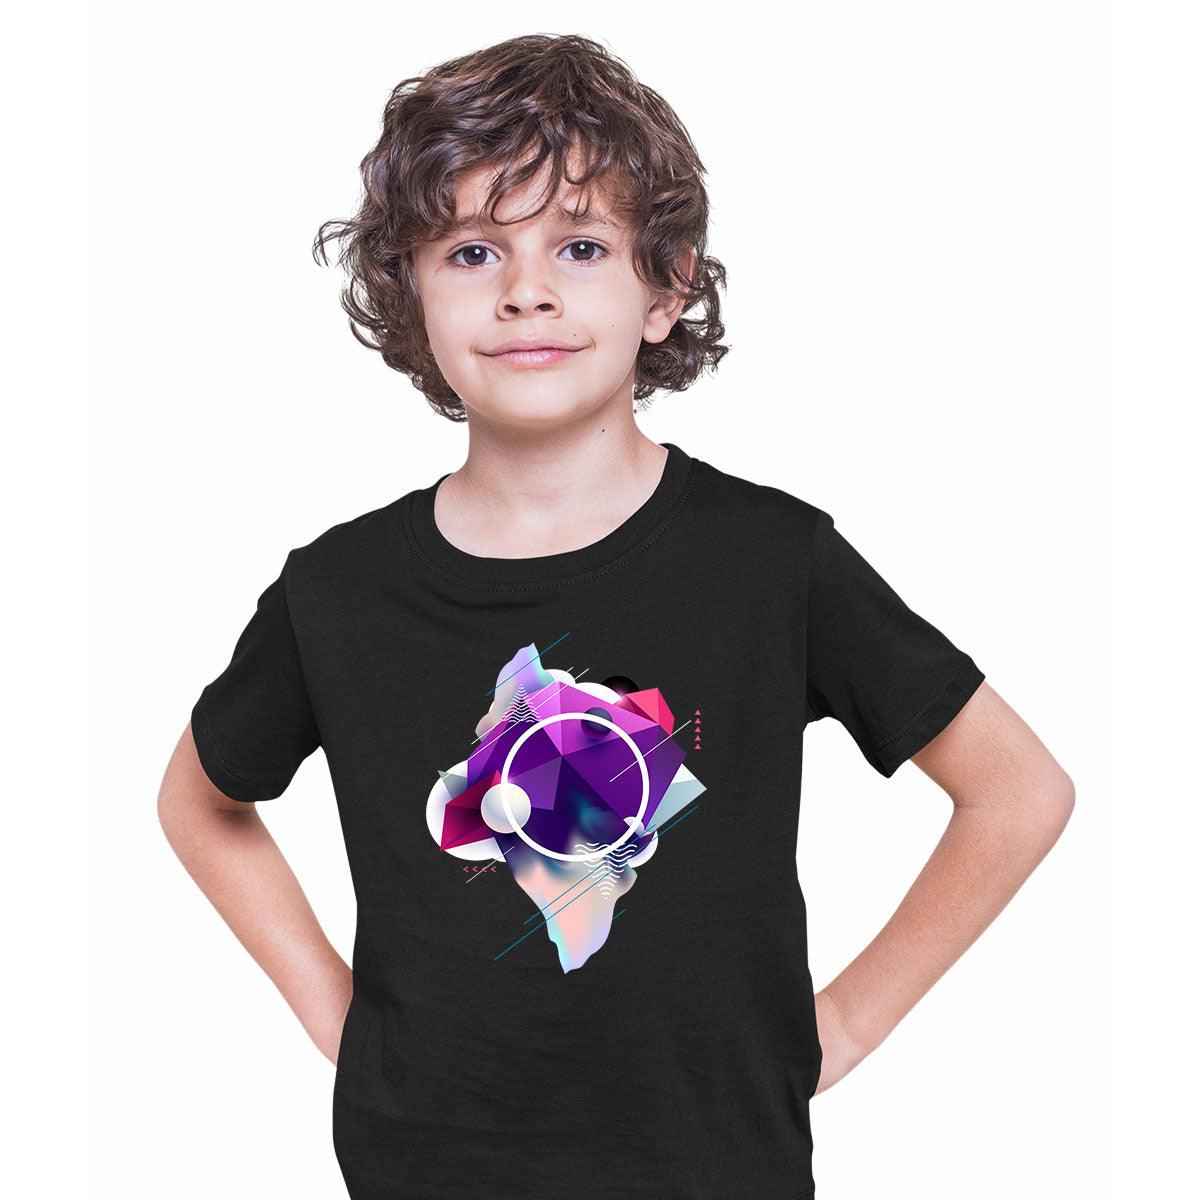 Fluid 3D T-Shirt Mixed Shapes Abstract Design Birthday Gift Funny T-shirt for Kids - Kuzi Tees